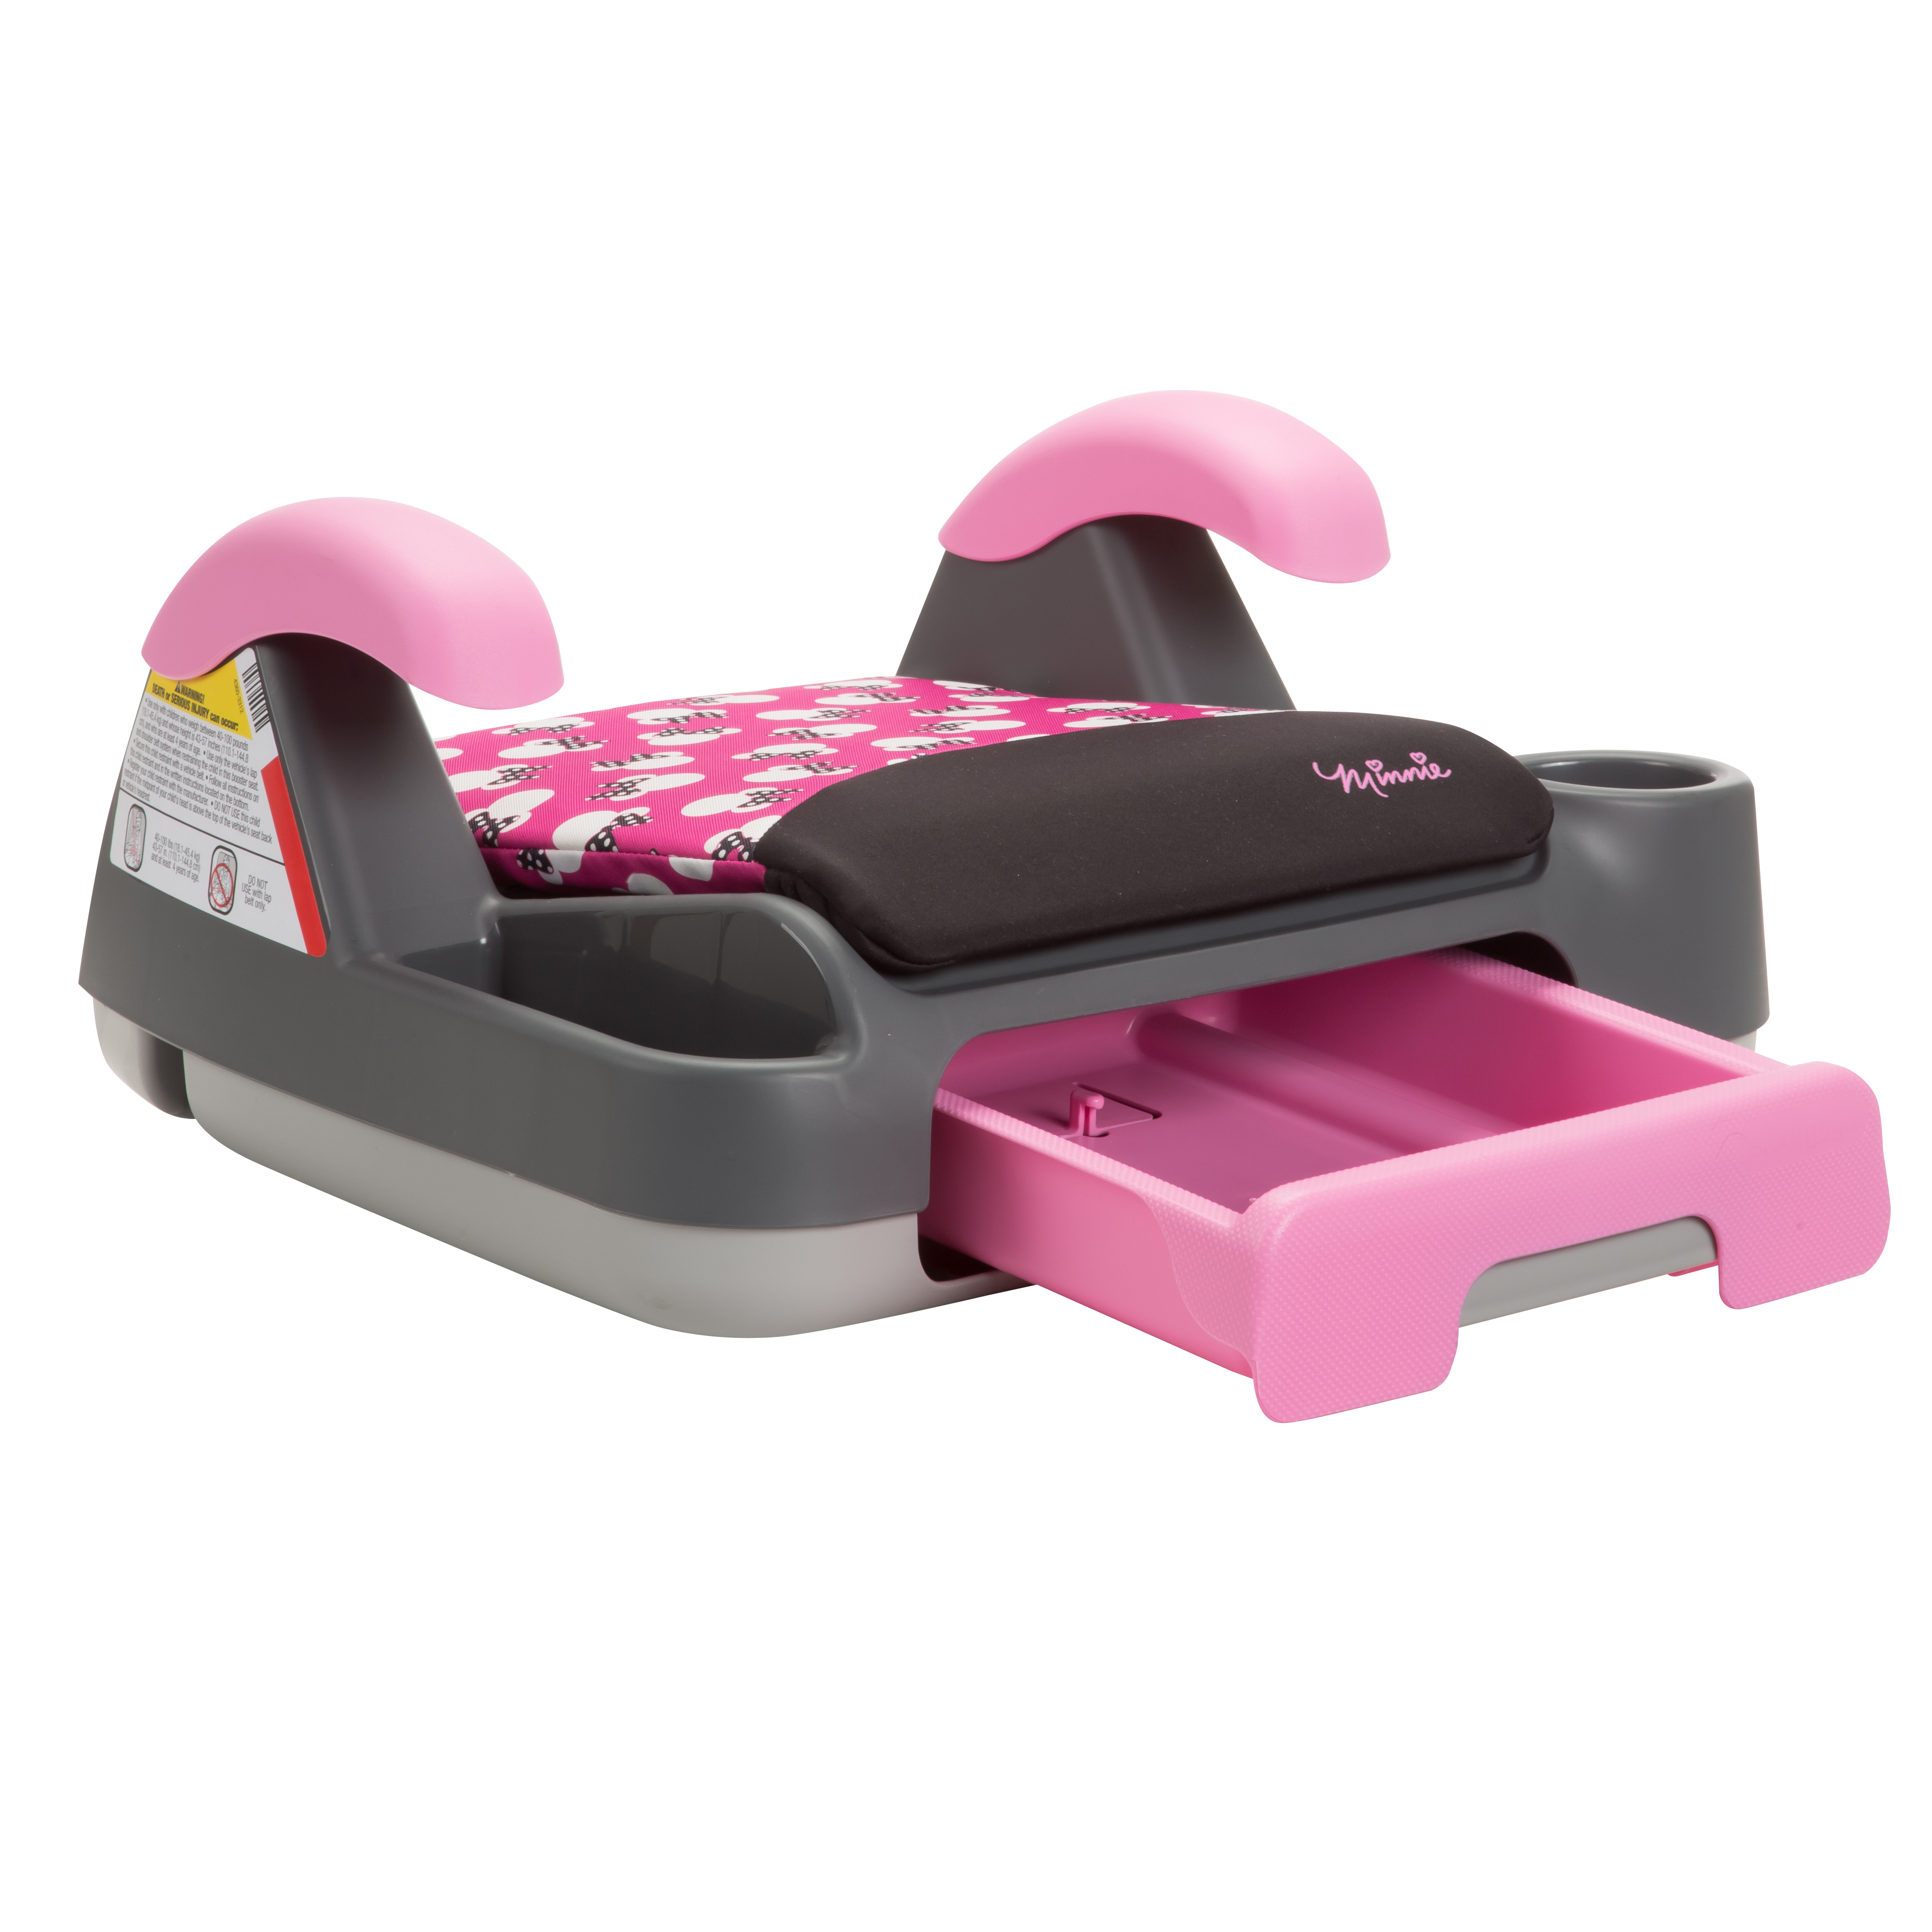 Disney Store 'n Go Backless Booster Car Seat, Minnie Silhouette Pink - image 2 of 7